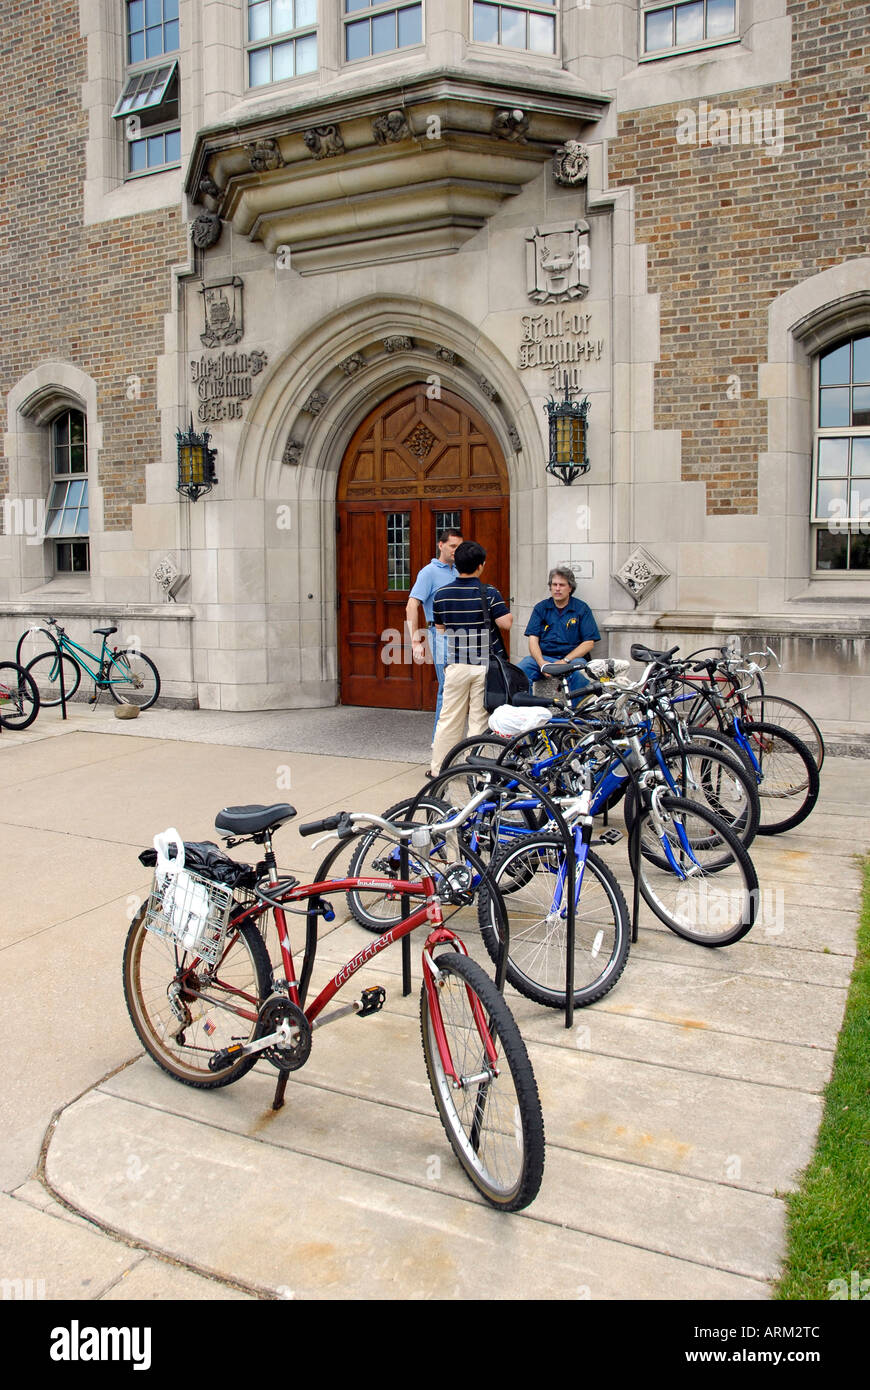 John Cushing Hall of Engineering auf dem Campus der University of Notre Dame in South Bend, Indiana IN Stockfoto